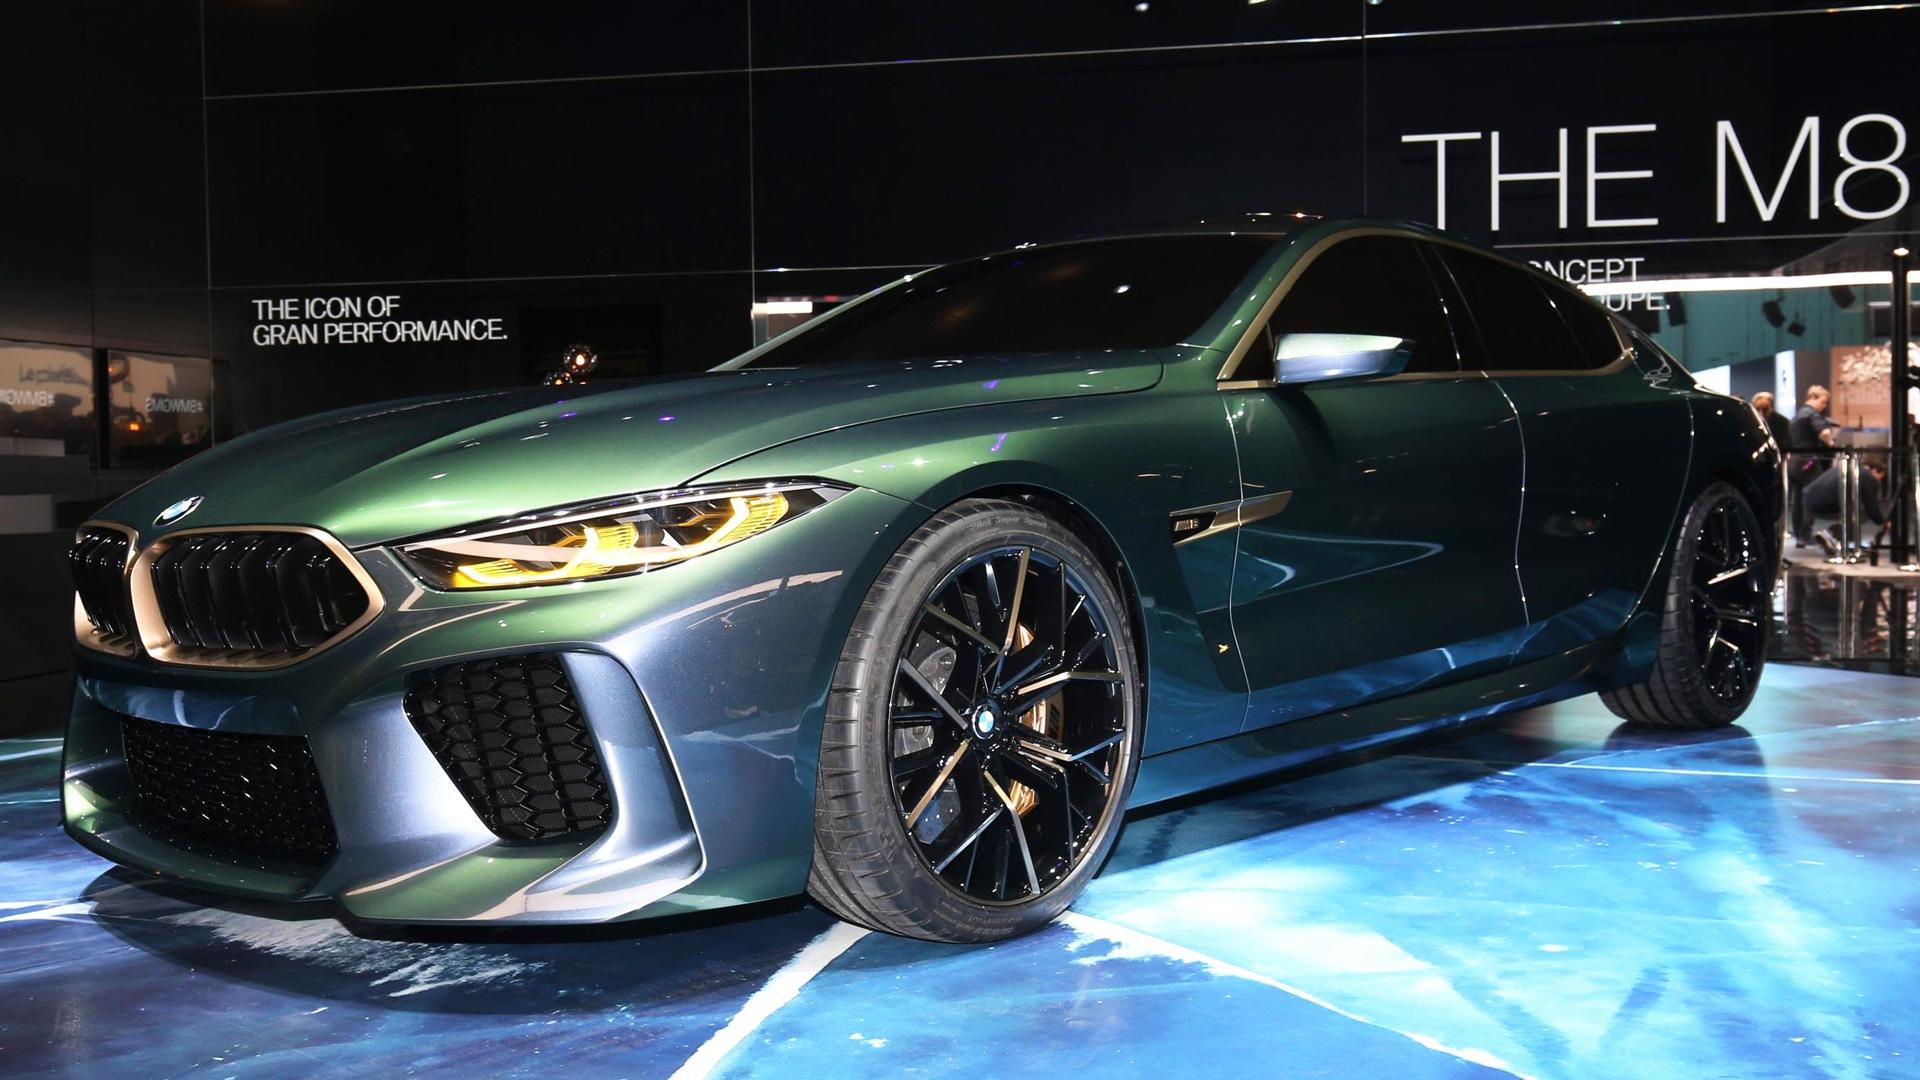 Concept previews BMW M8 Gran Coupe coming in 2019